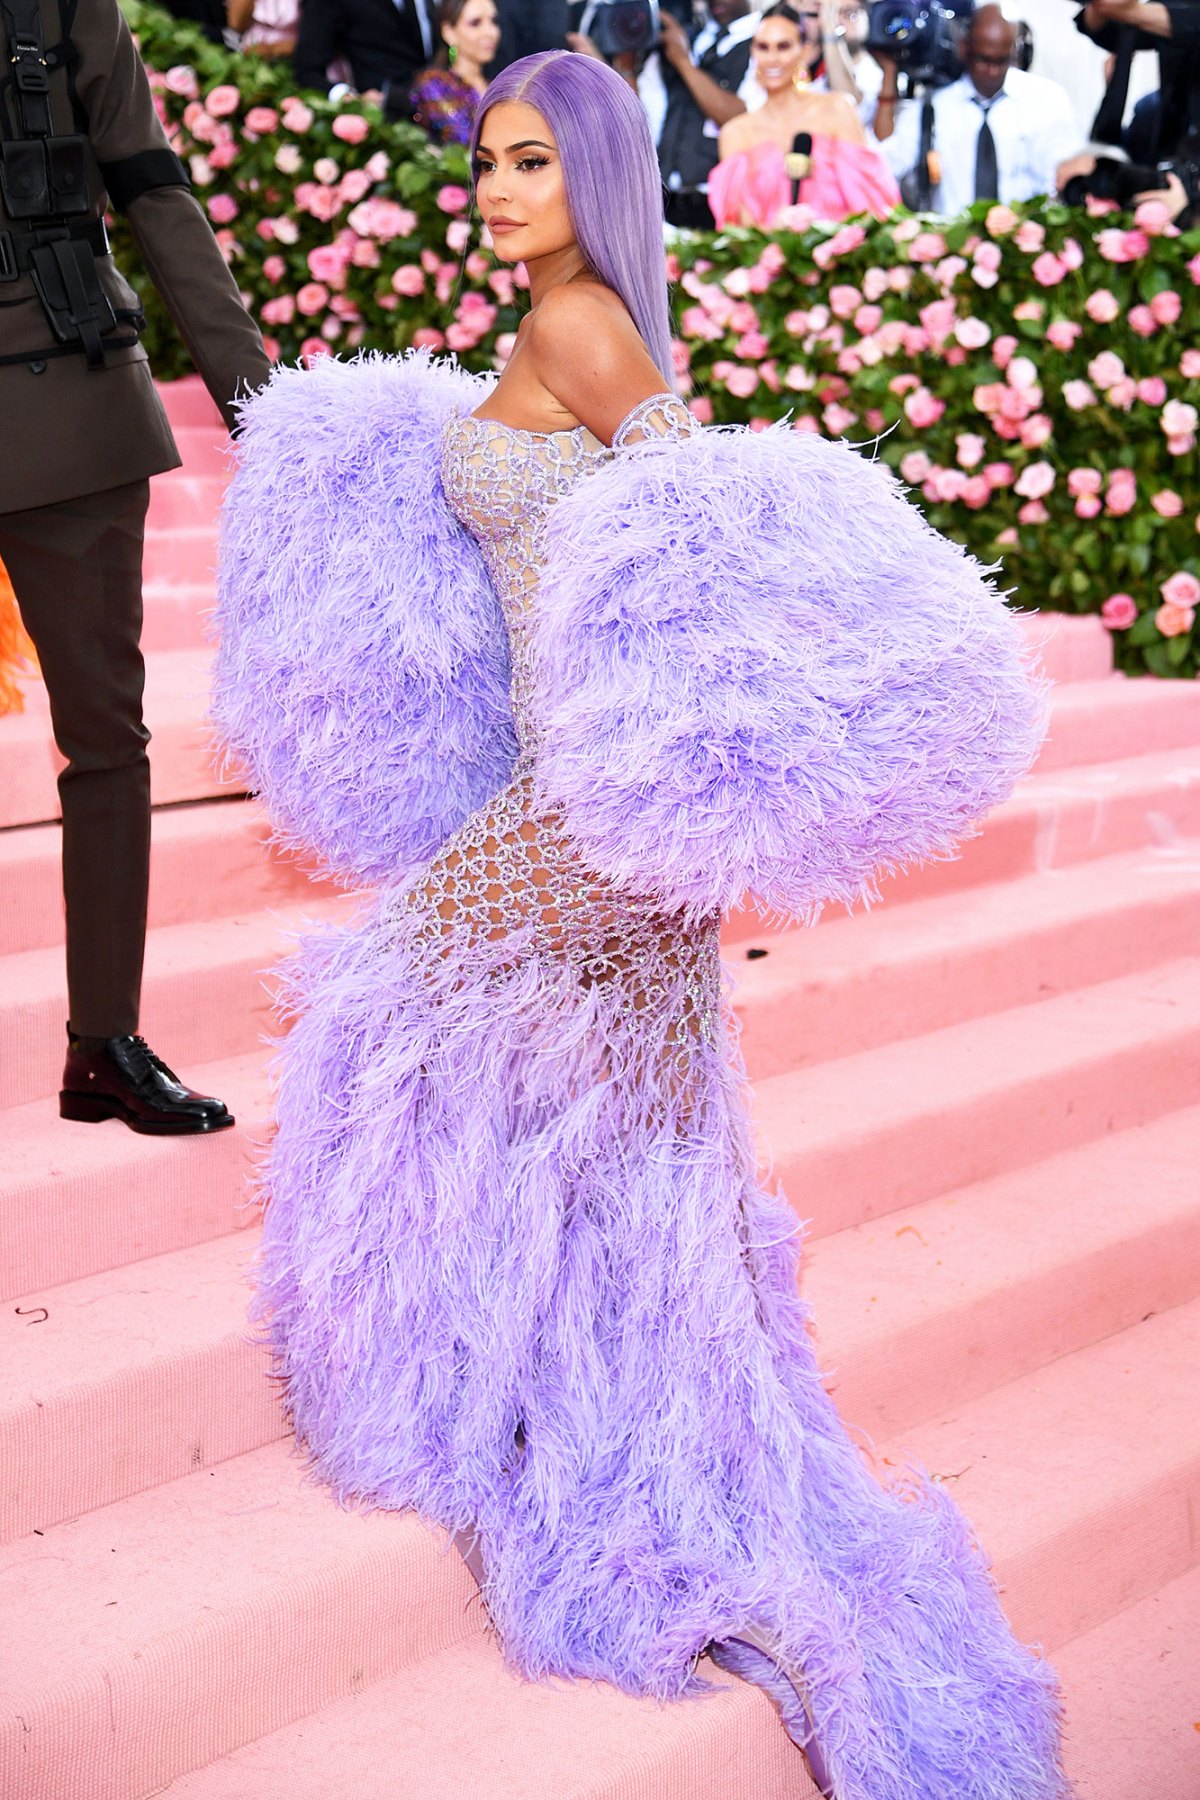 https://www.usmagazine.com/stylish/pictures/met-gala-2019-red-carpet-fashion-see-celeb-dresses-gowns/kylie-jenner-28/